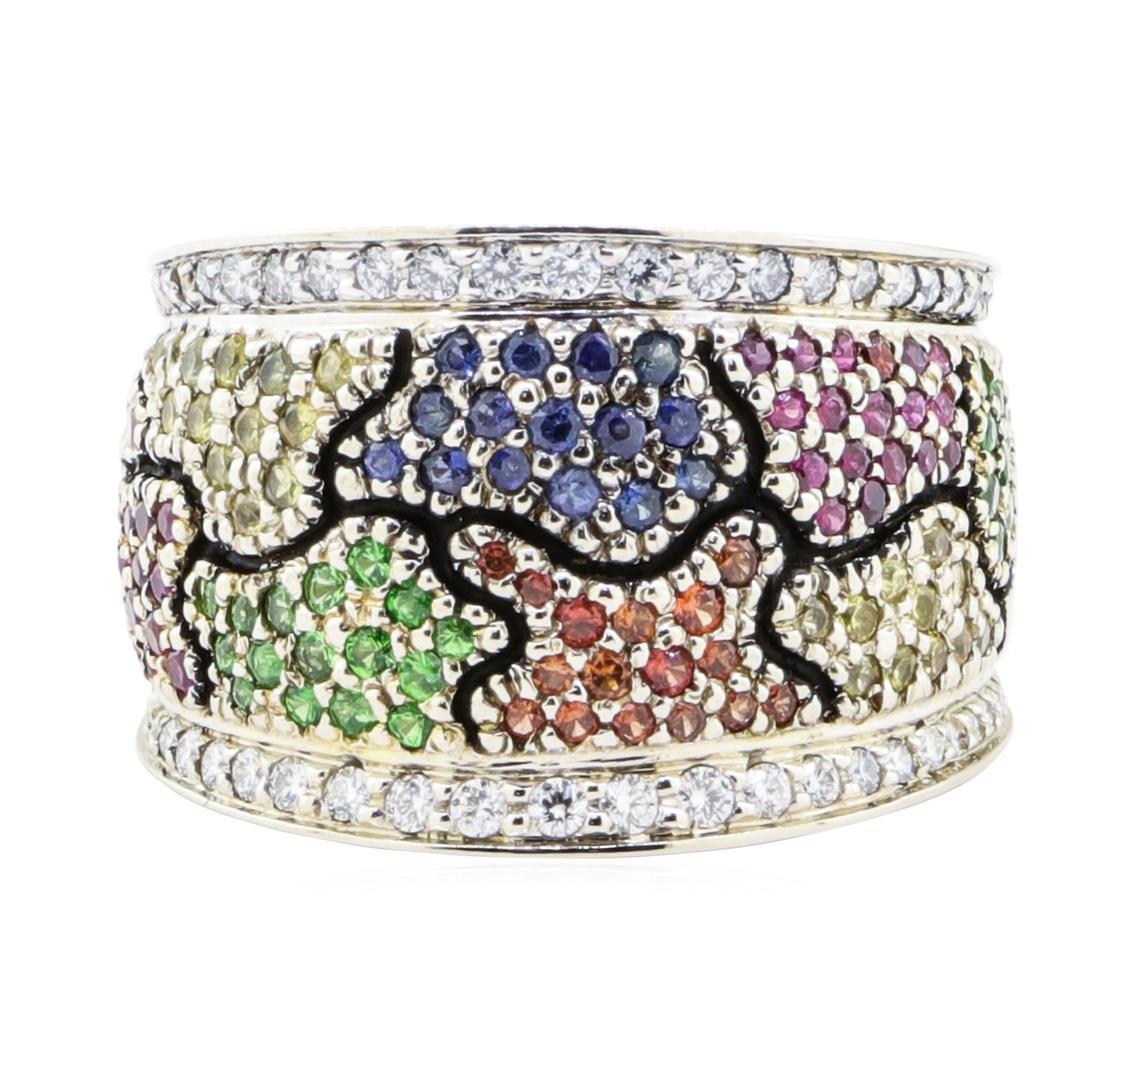 1.64 ctw Multi-colored Gemstone and Diamond Wide Band - 18KT Yellow And White Go